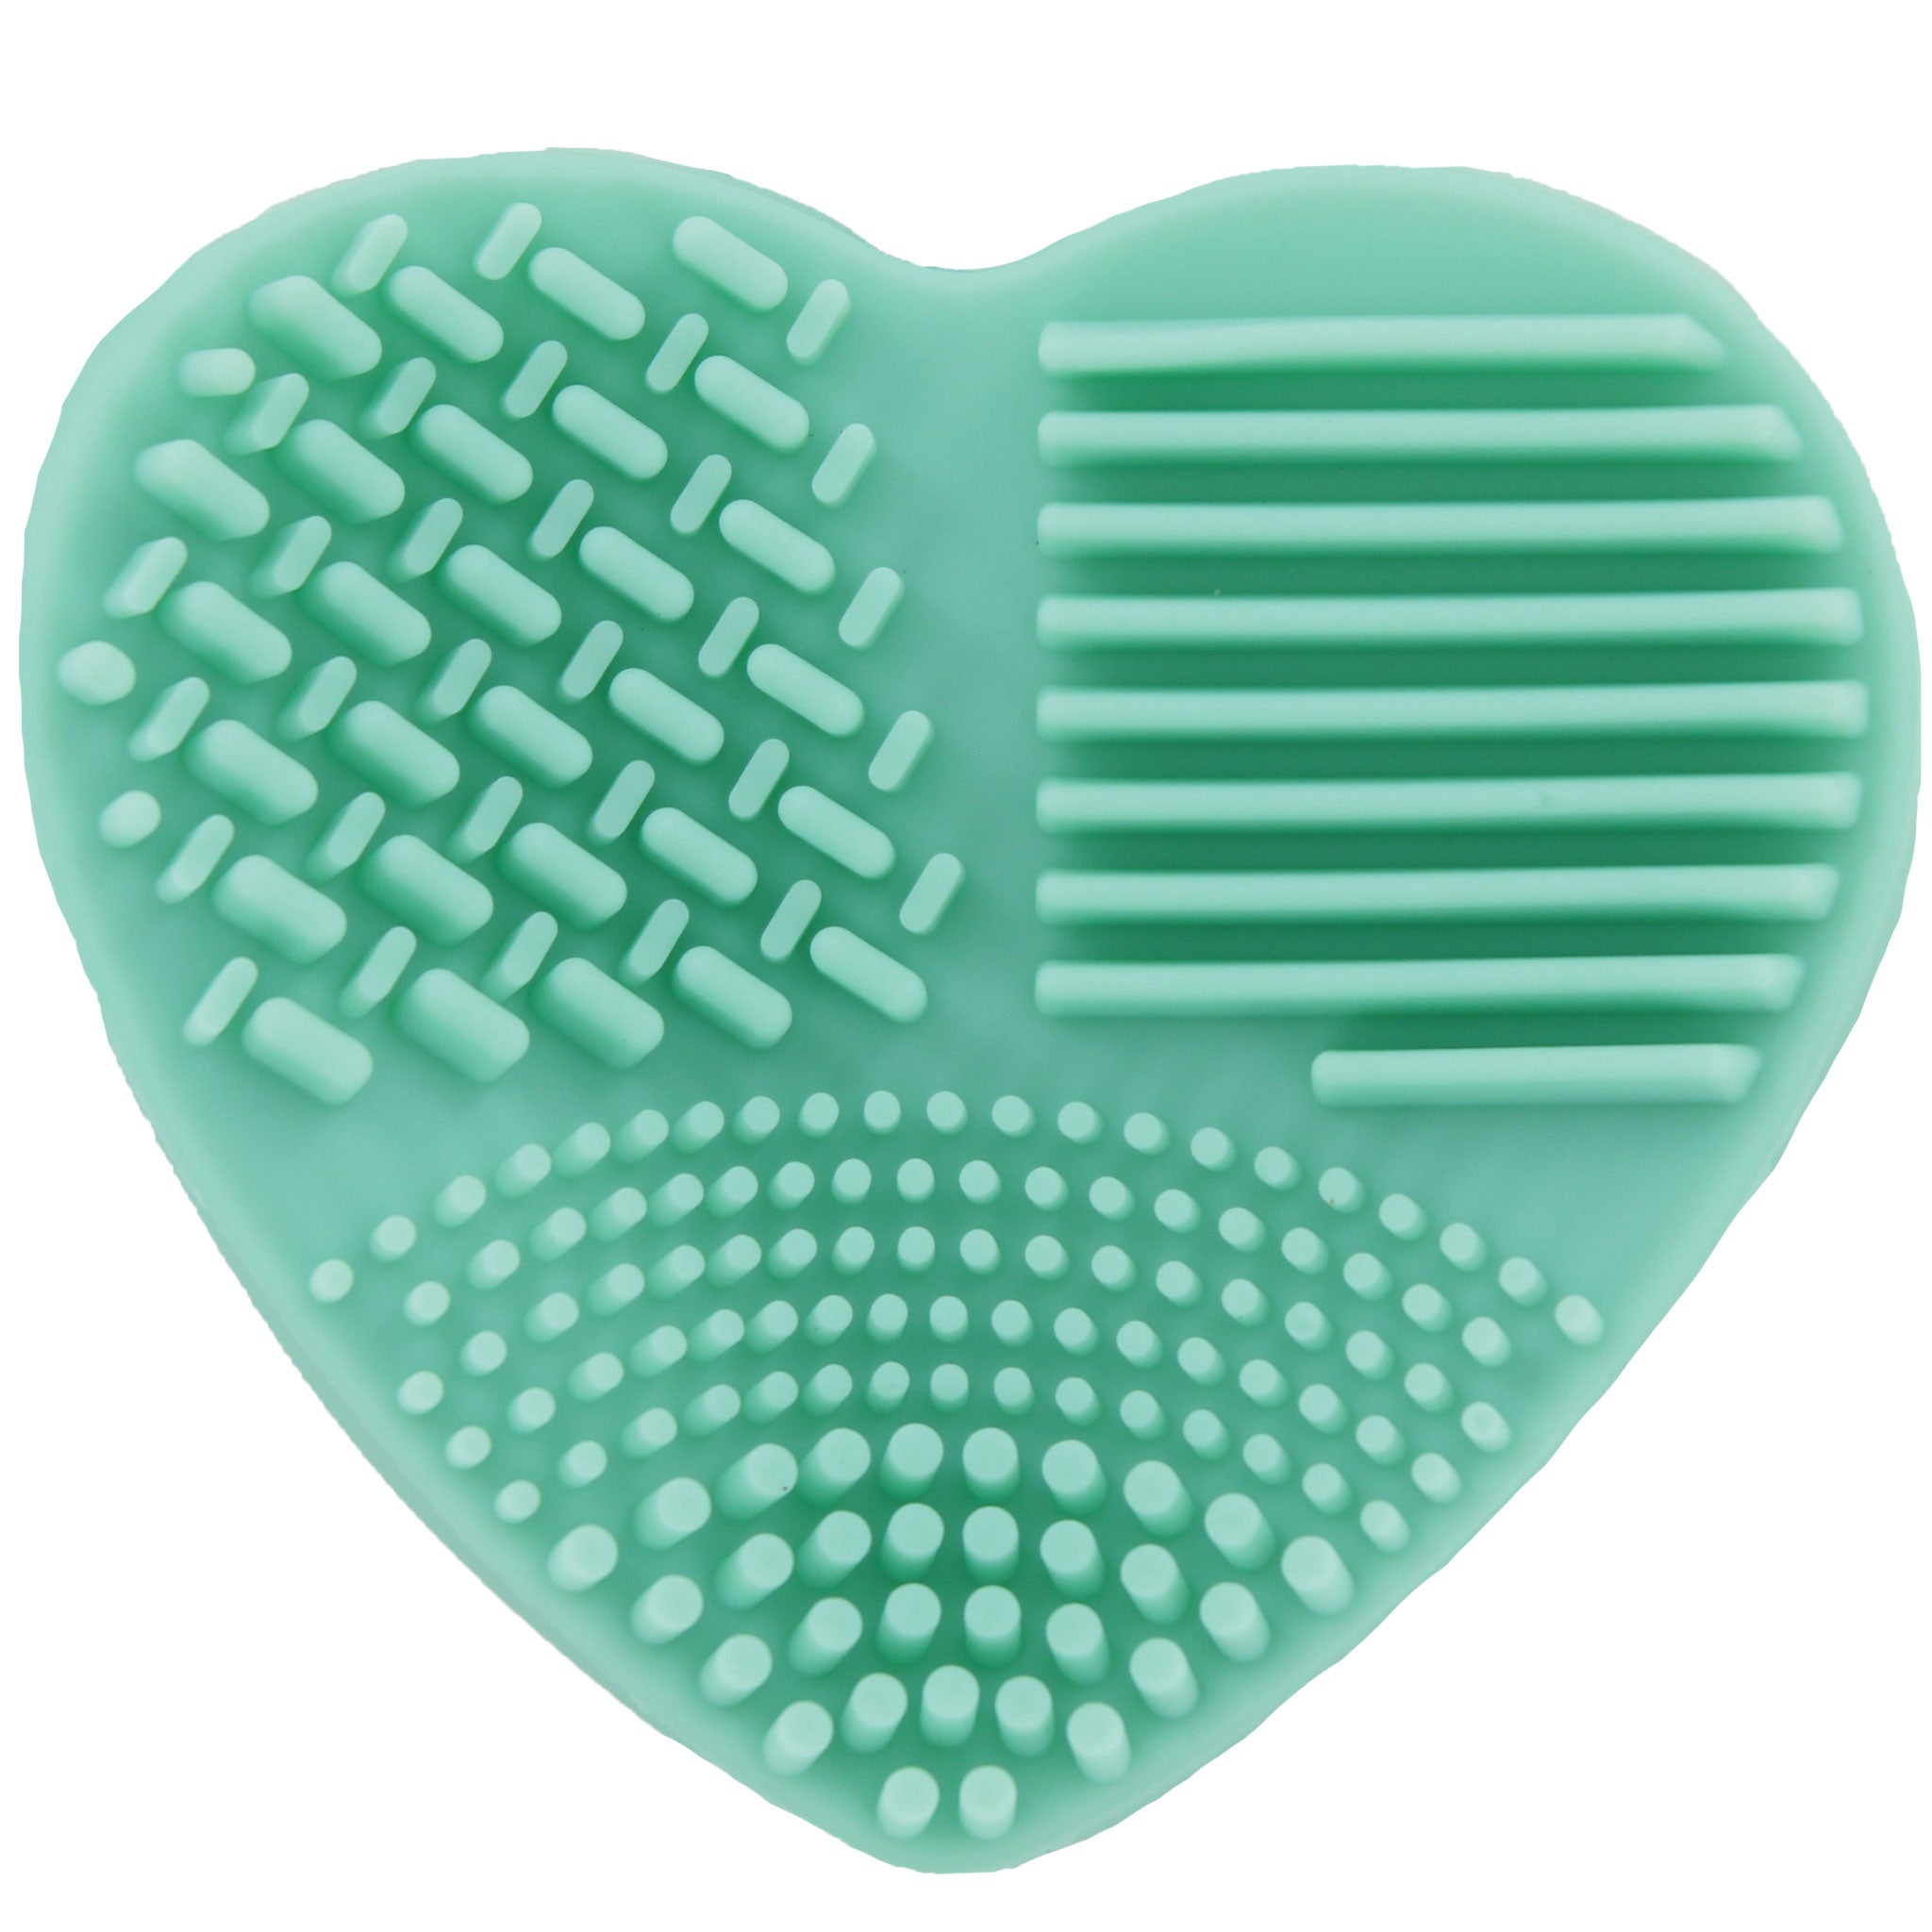 Ashley Lee Silicone Heart Brush Cleaning Tool Green